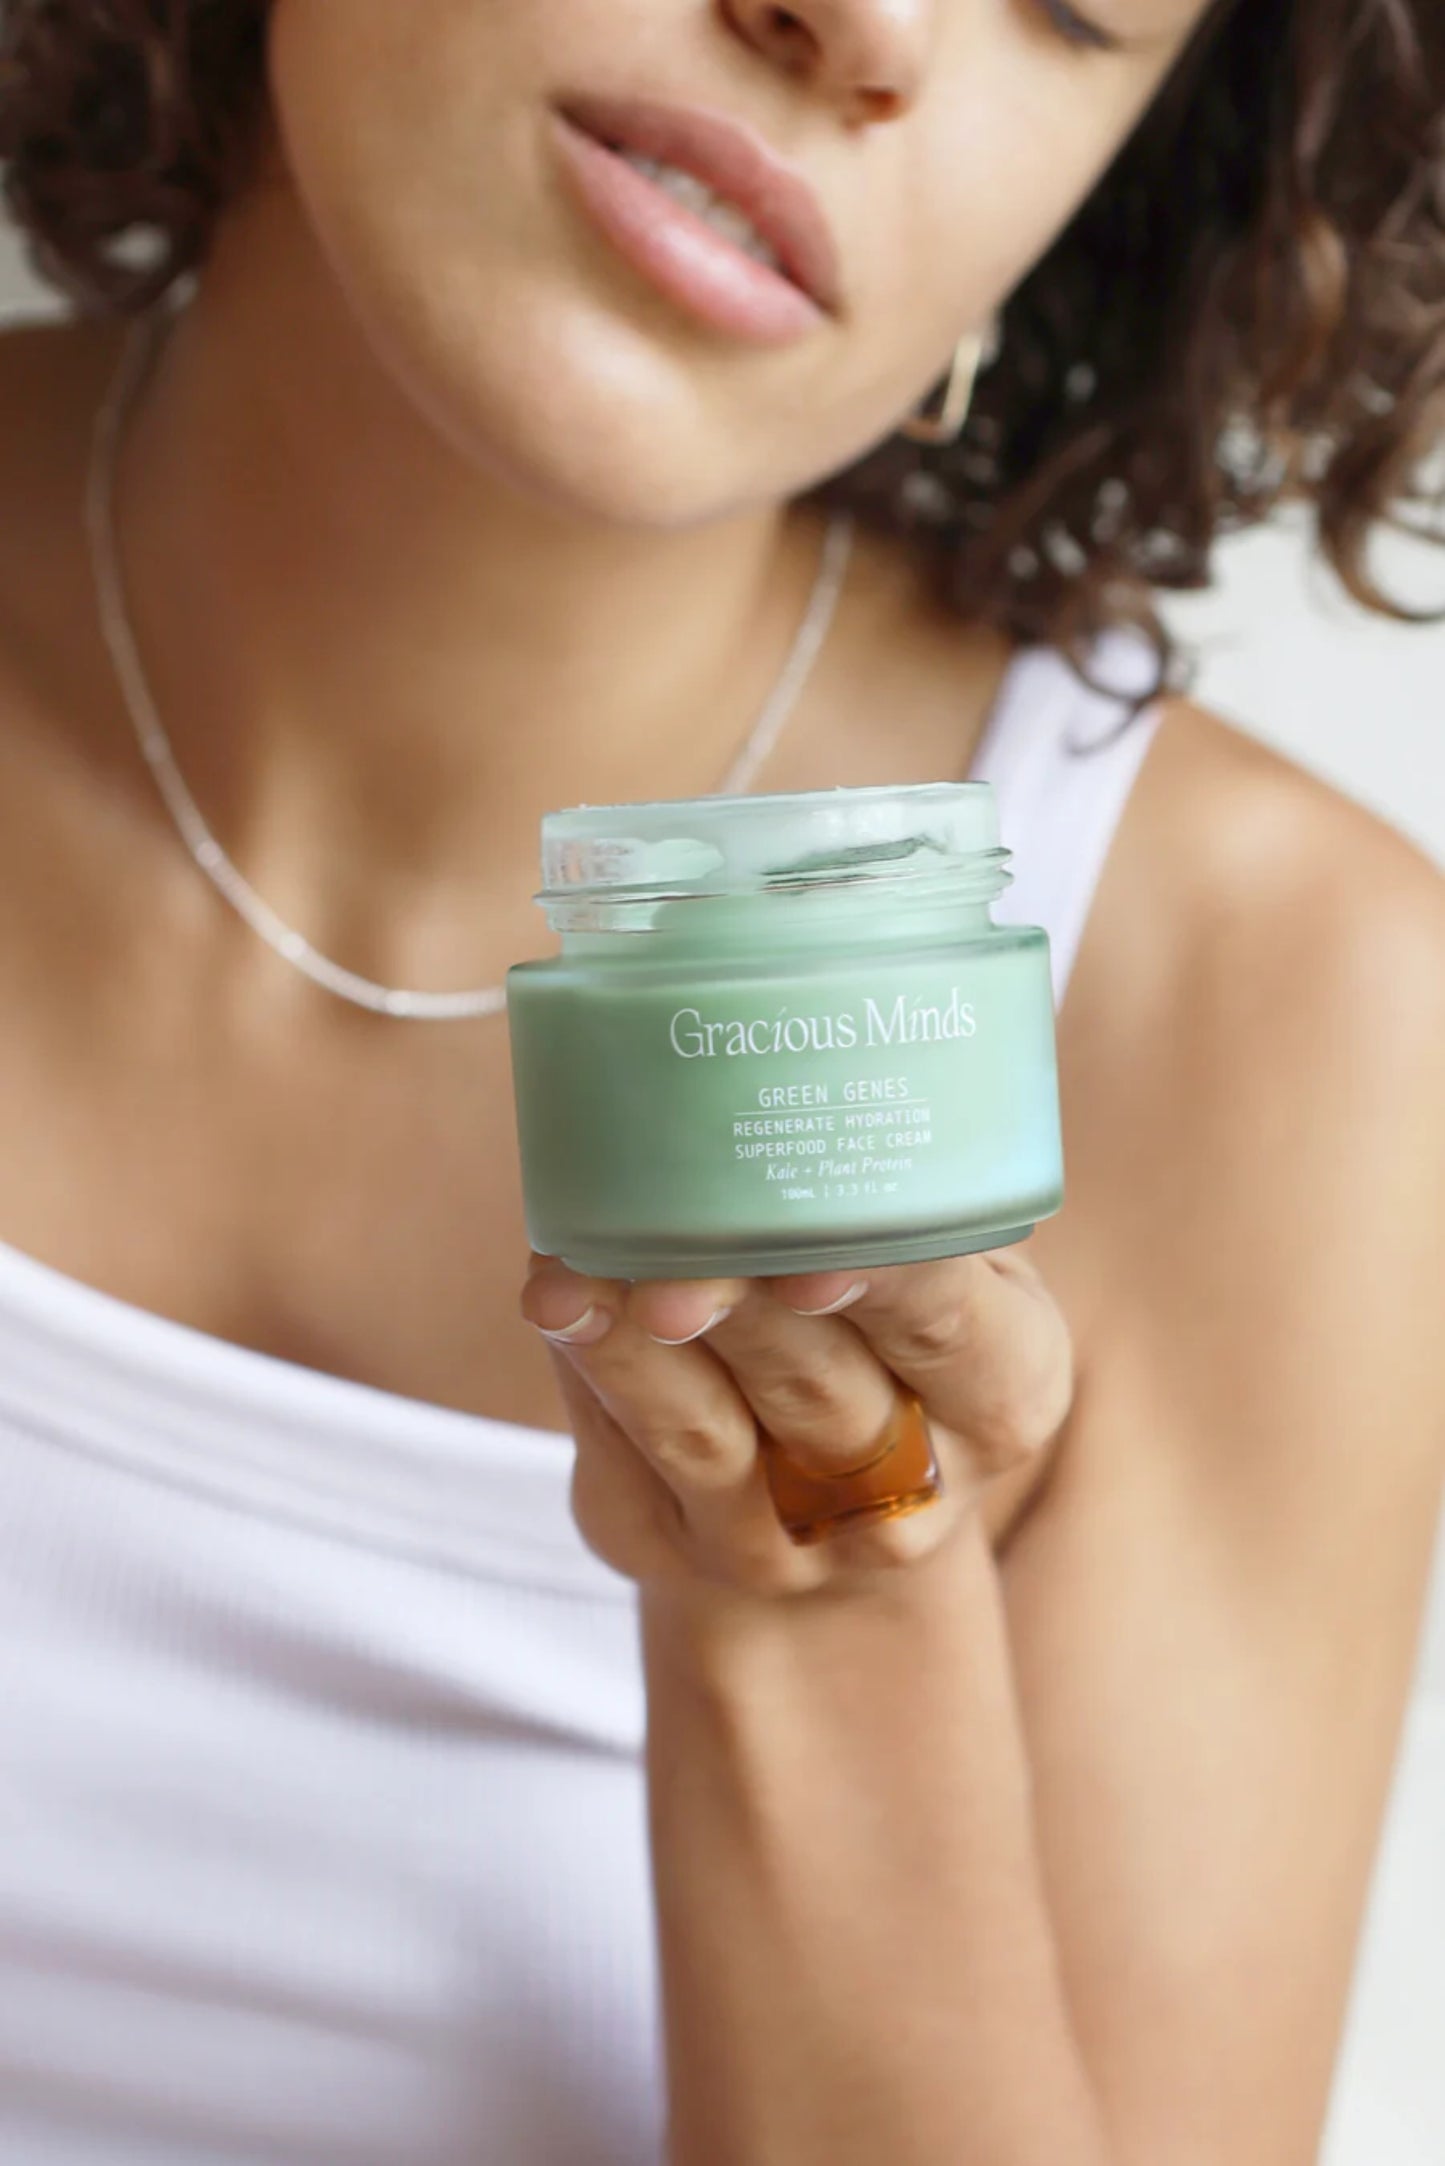 Gracious Minds Green Genes Regenerate Hydration Superfood Face Cream